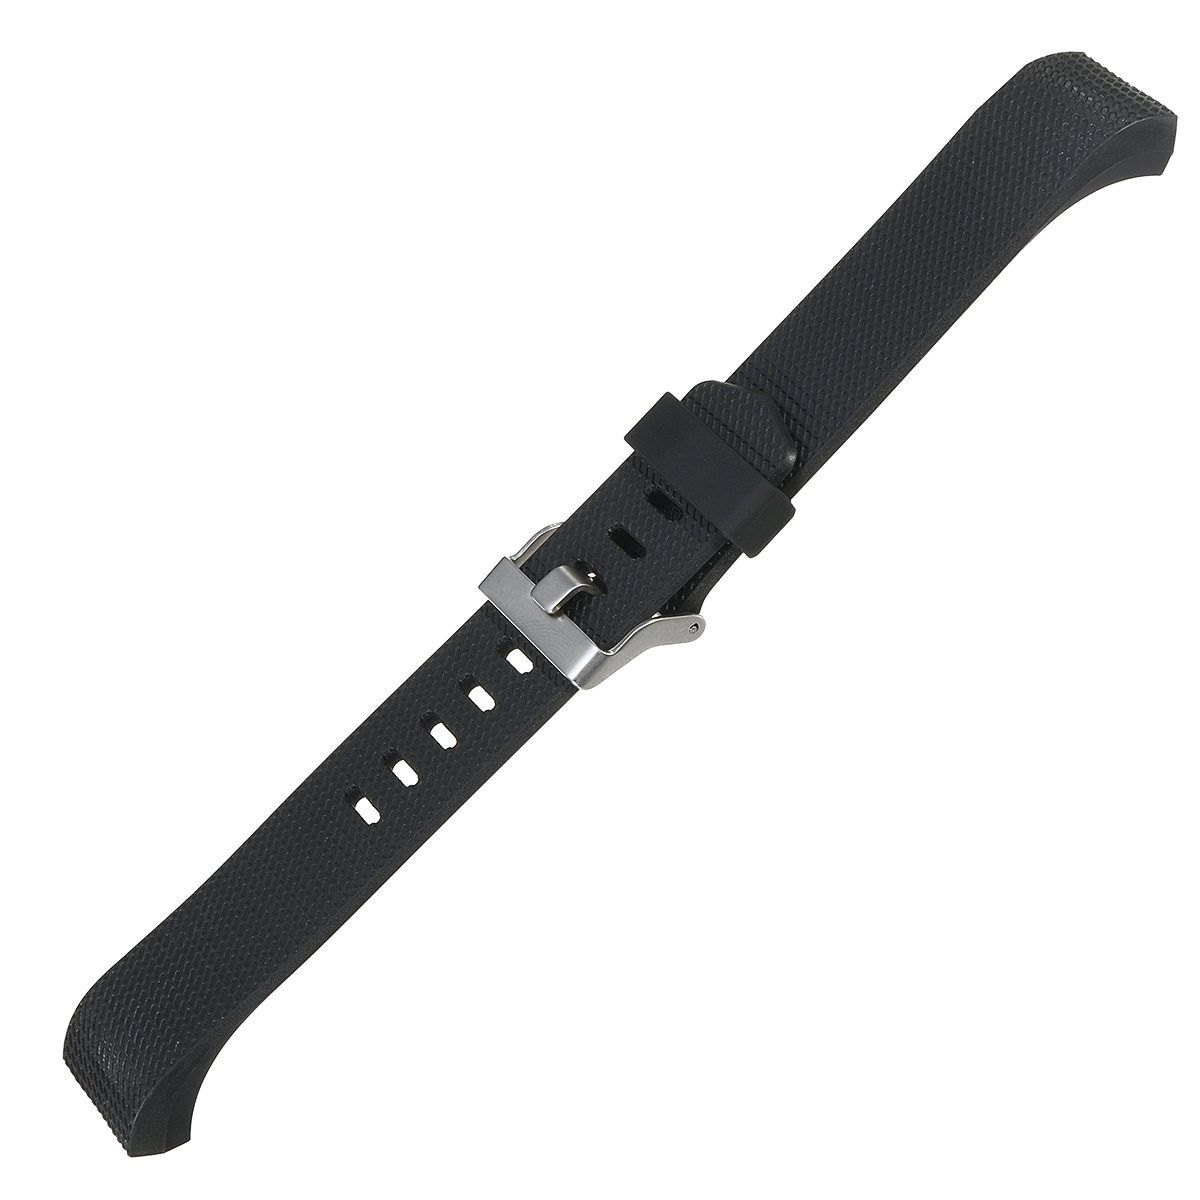 TPE-Replacement-Anti-skid-Bracelet-Watch-Band-for-Fitbit-Charge-2-1294927